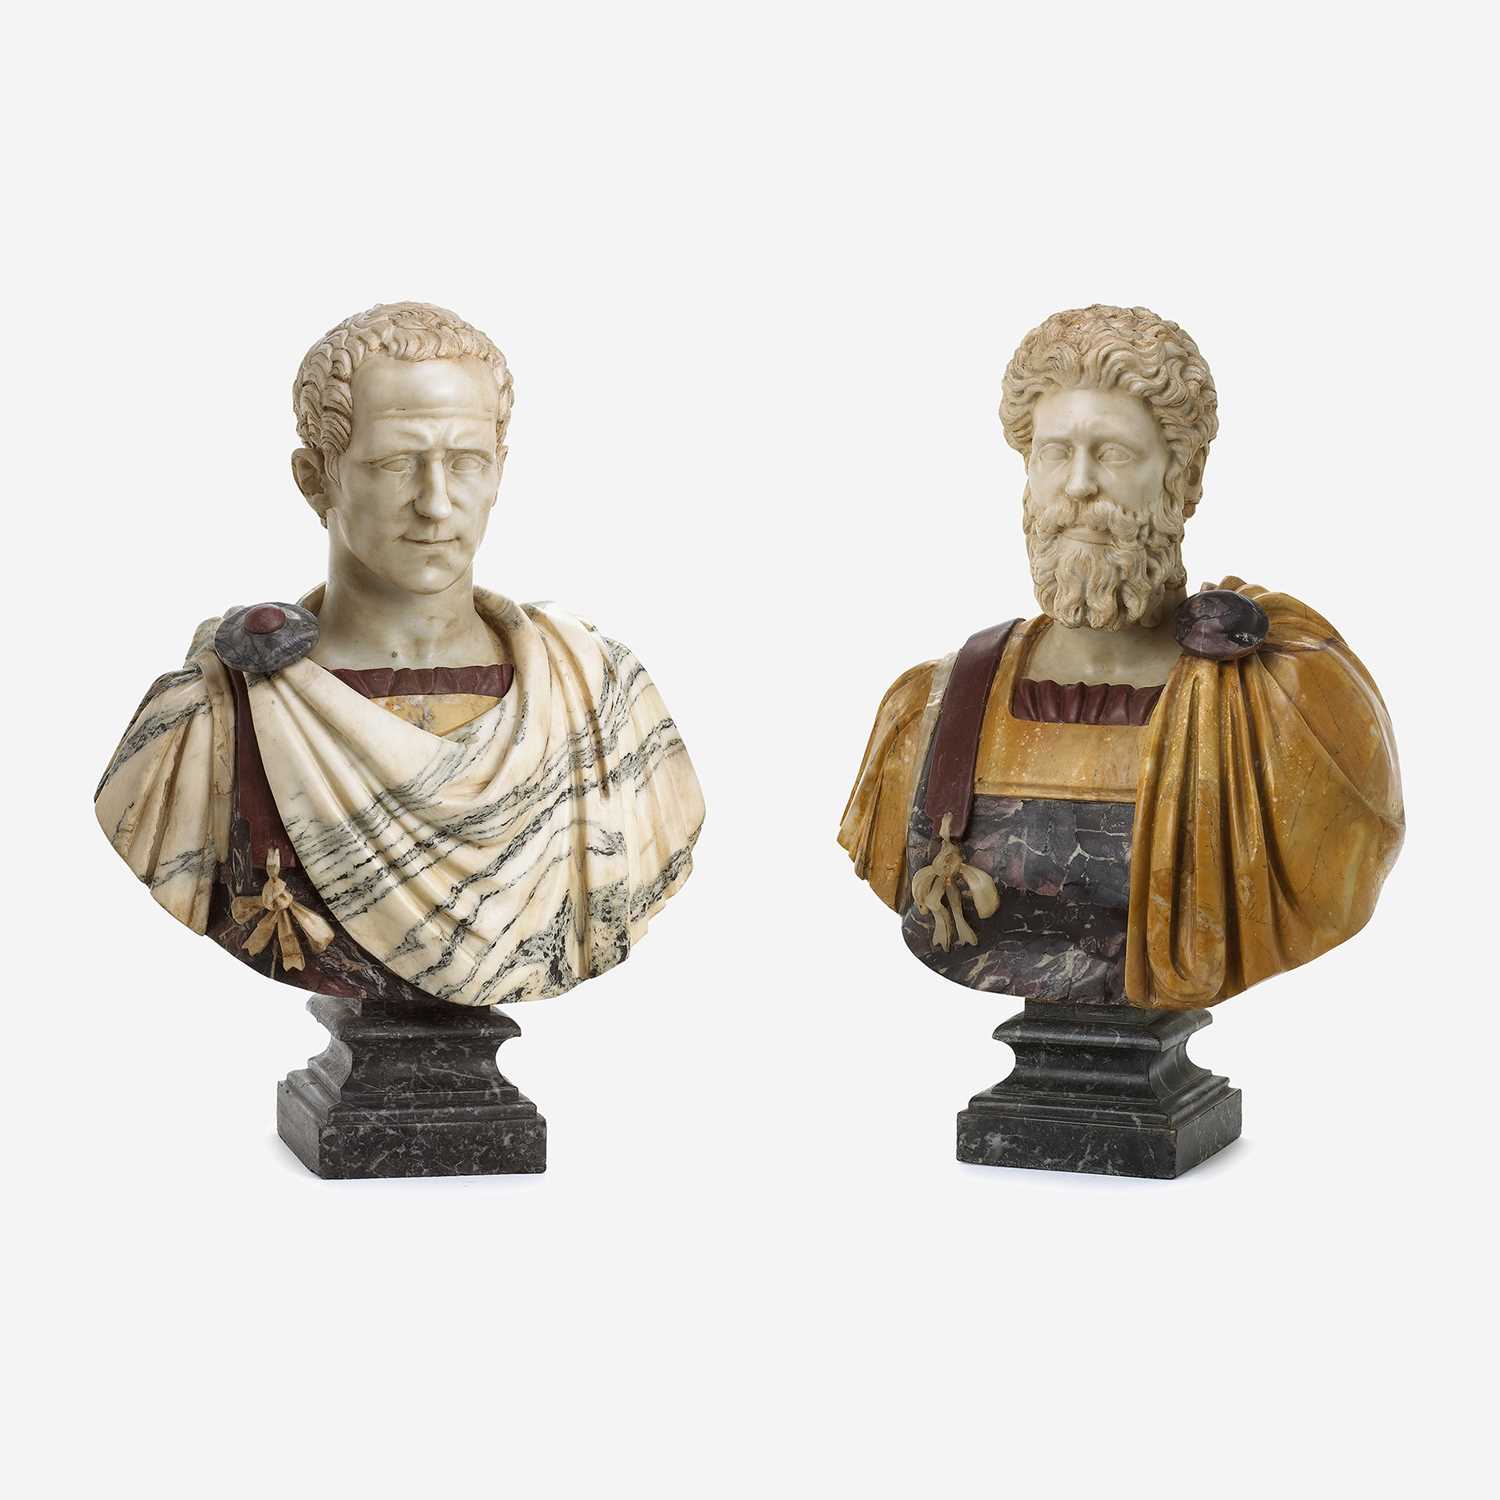 Lot 132 - Two Carved Varicolored Marble Busts of Roman Emperors